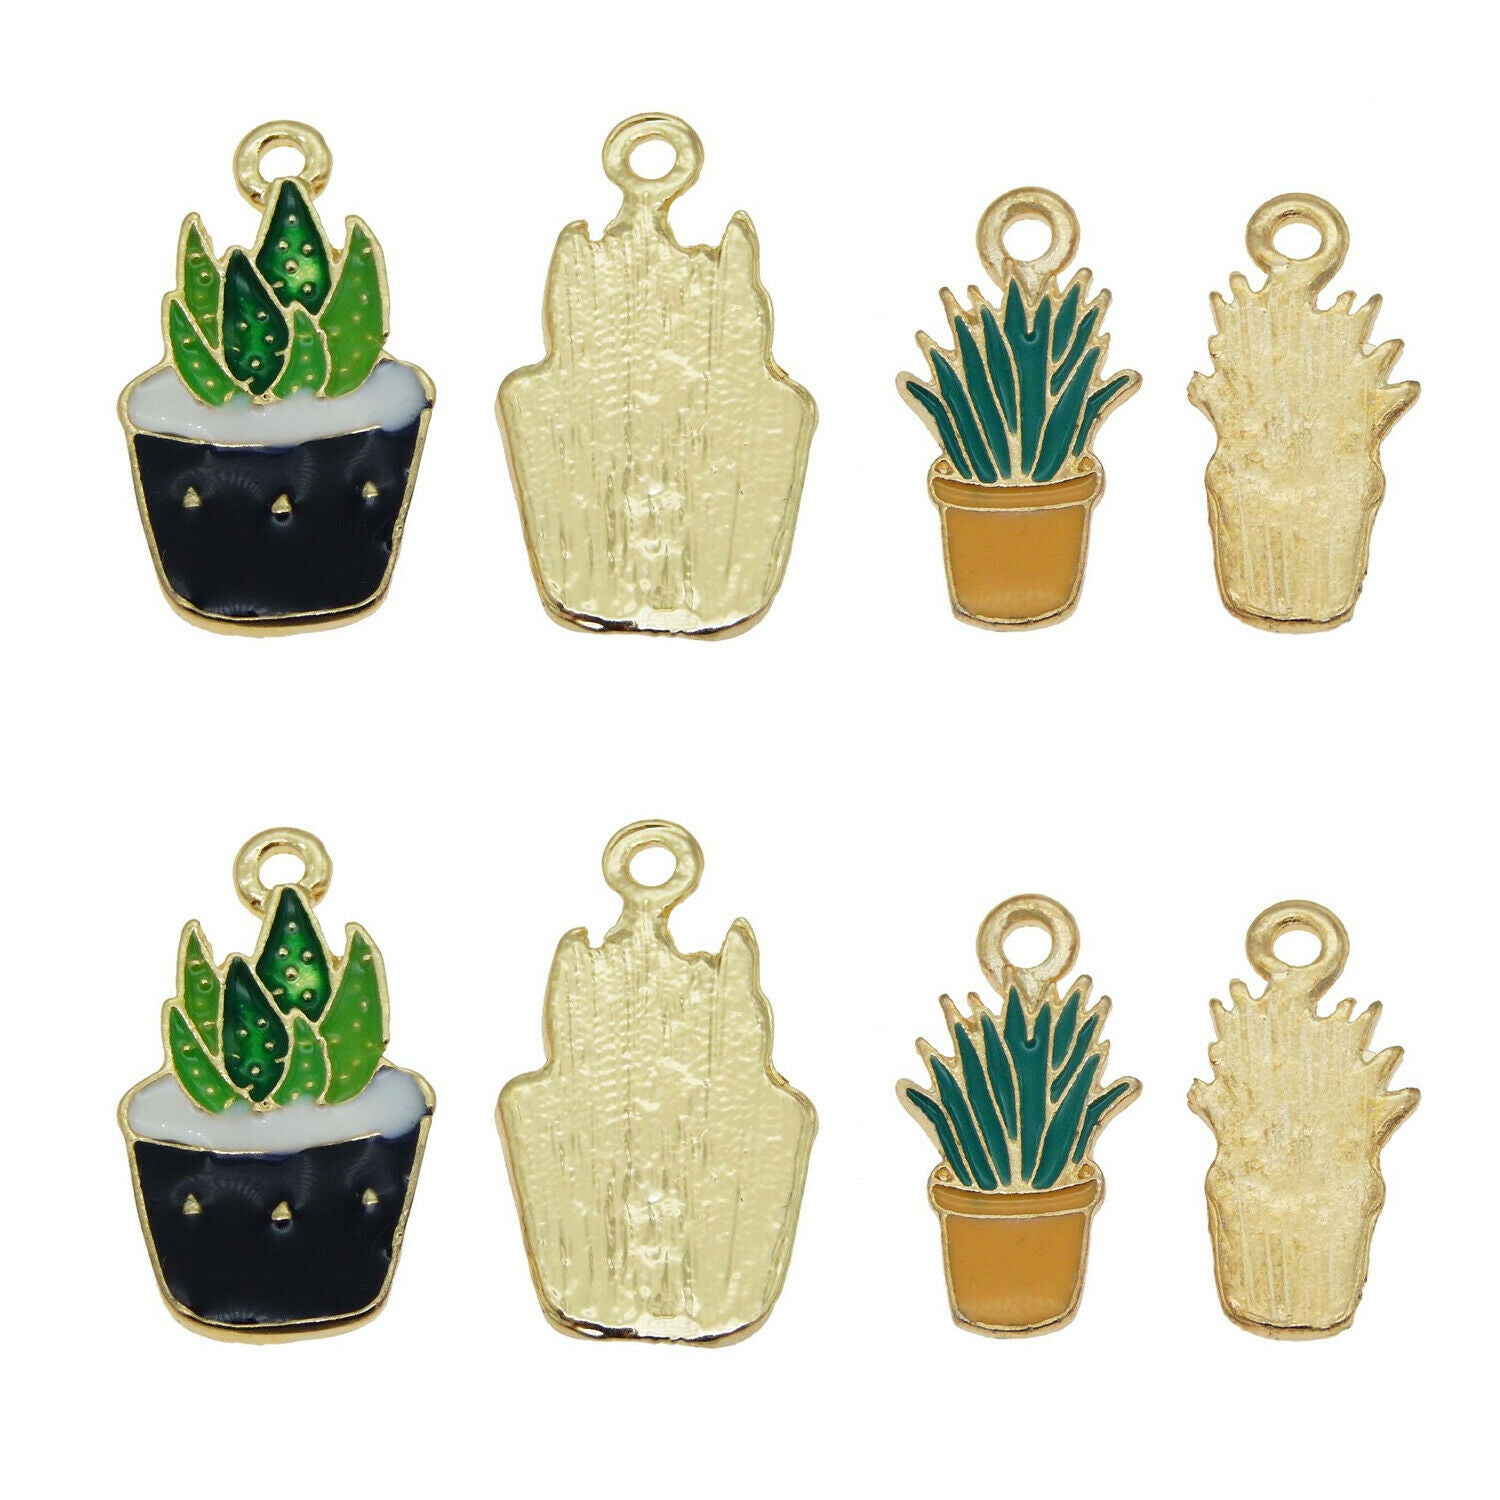 10 pcs Mixed Cactus Potted Plants Charms Enamel Plated Earring Pendant Findings